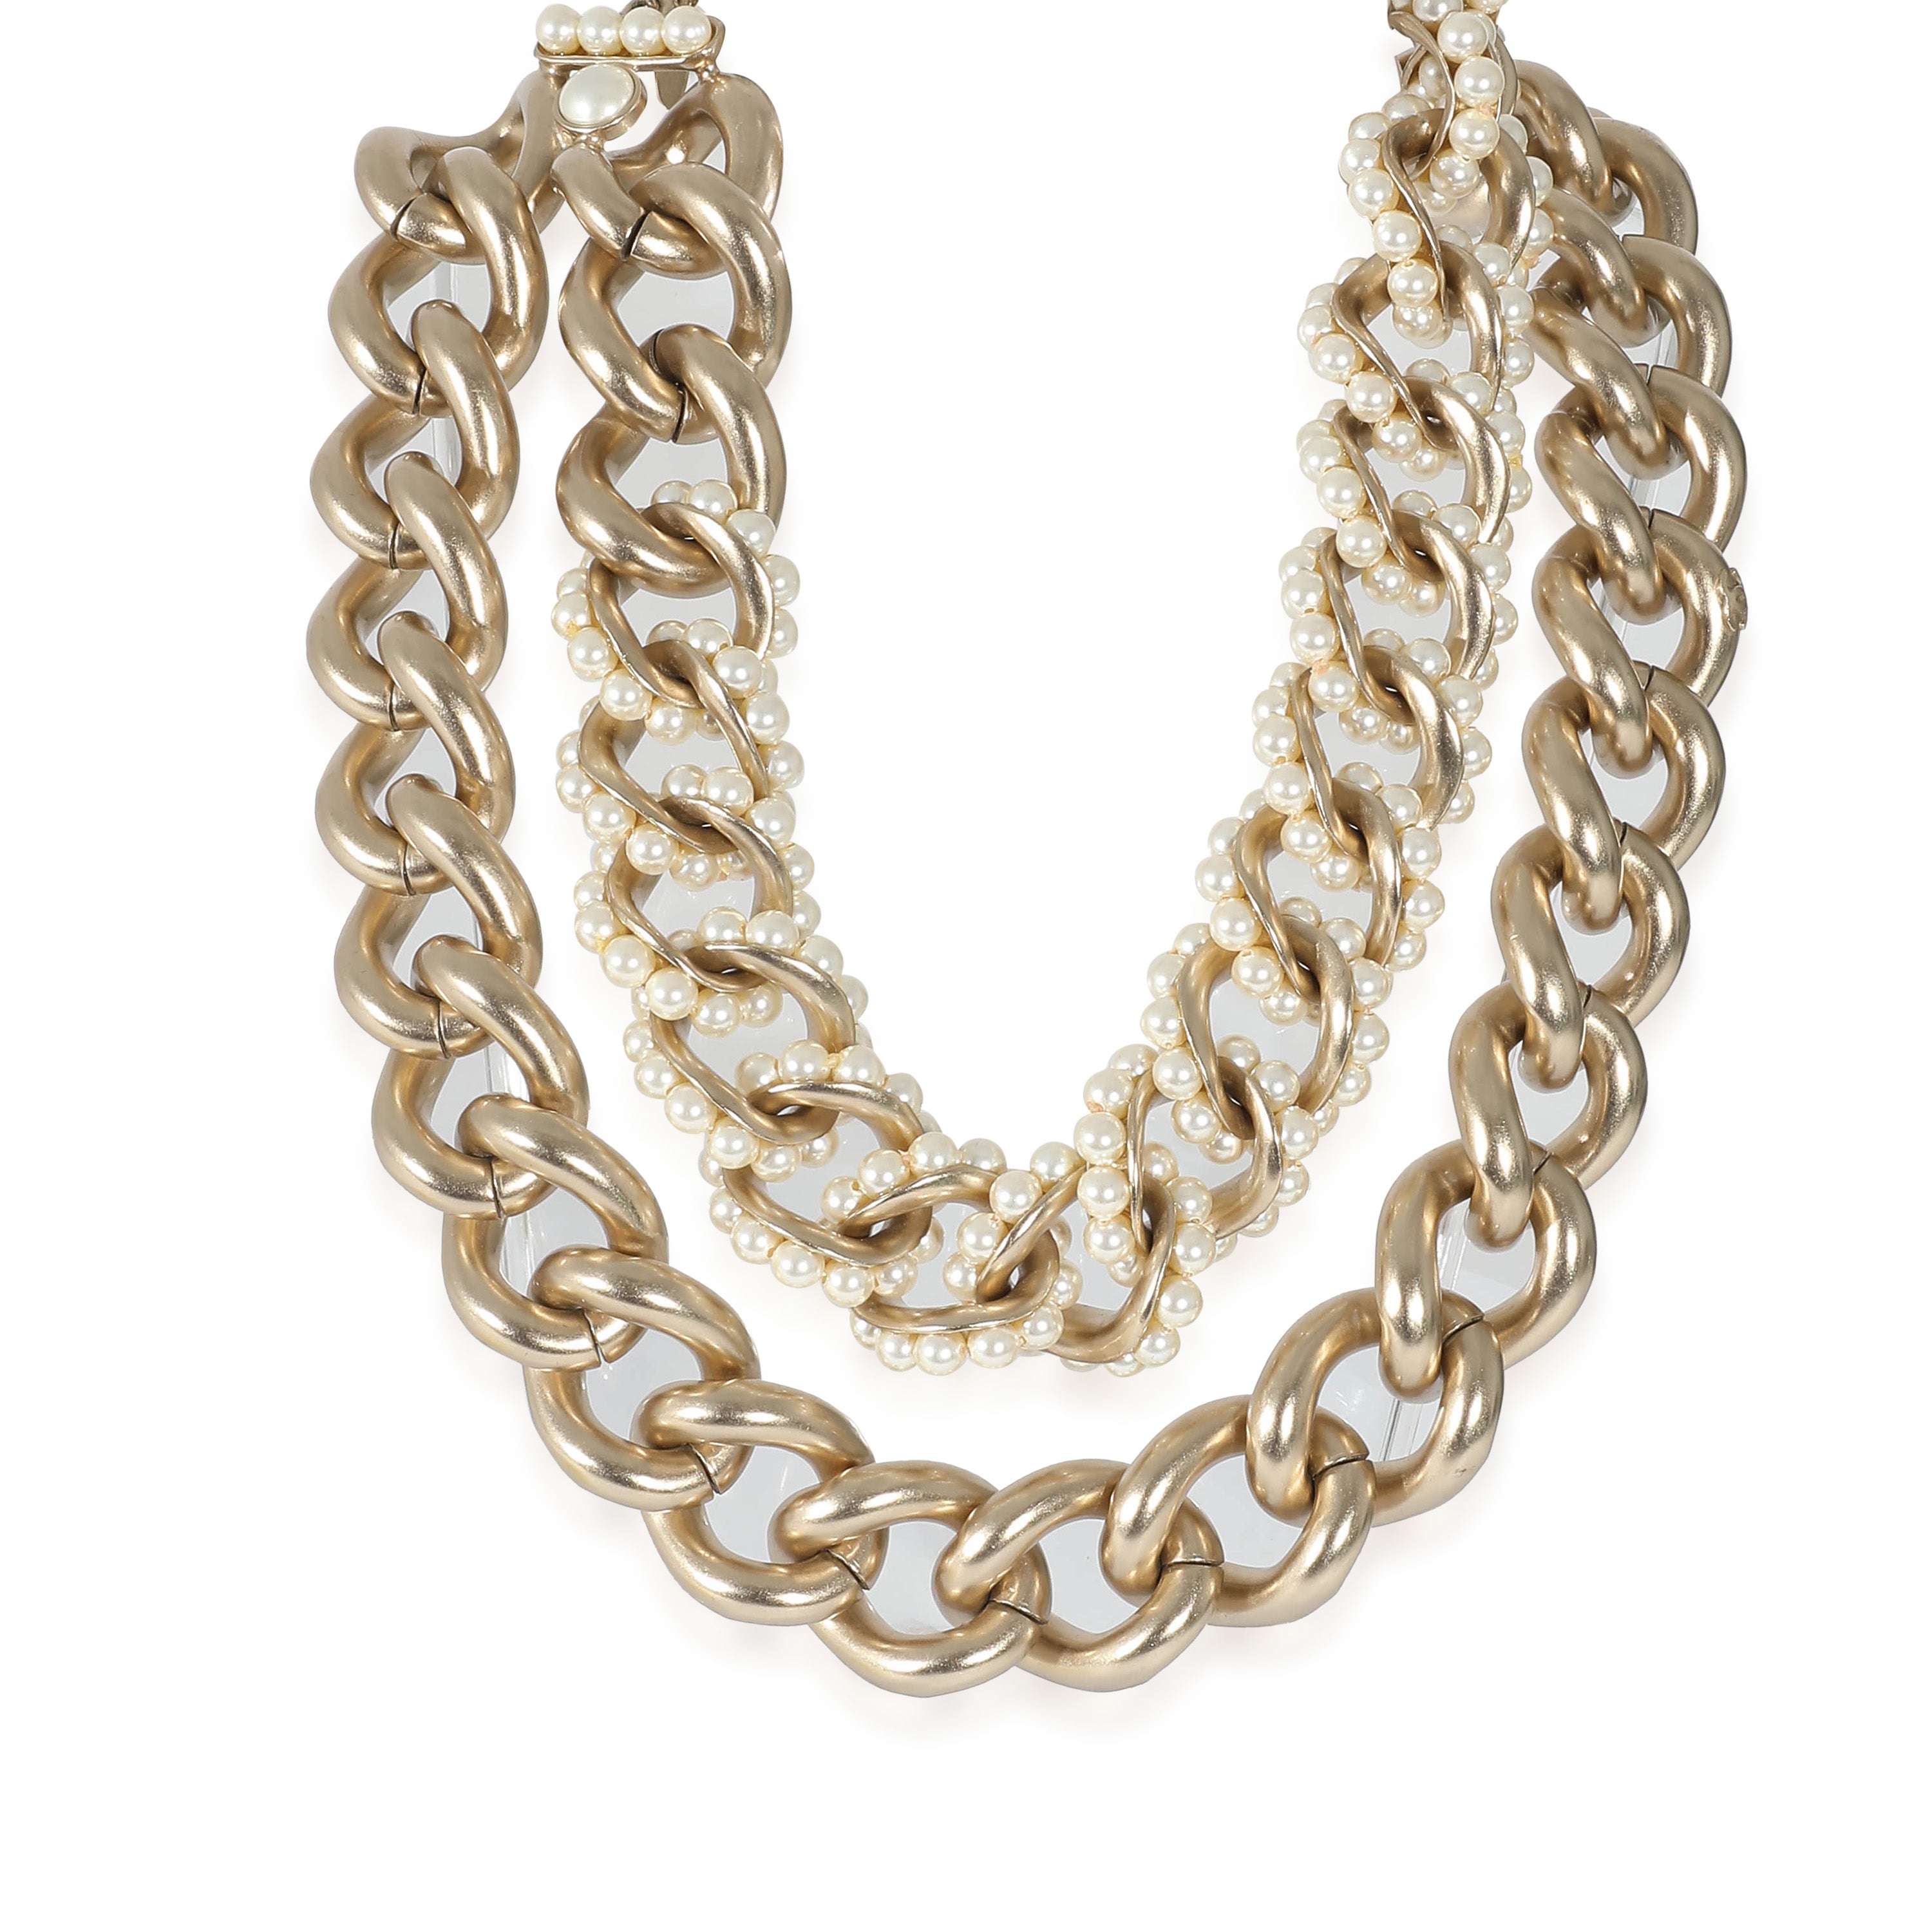 Chanel 2013 Faux Pearl Multi-Strand Choker Necklace – Mine & Yours